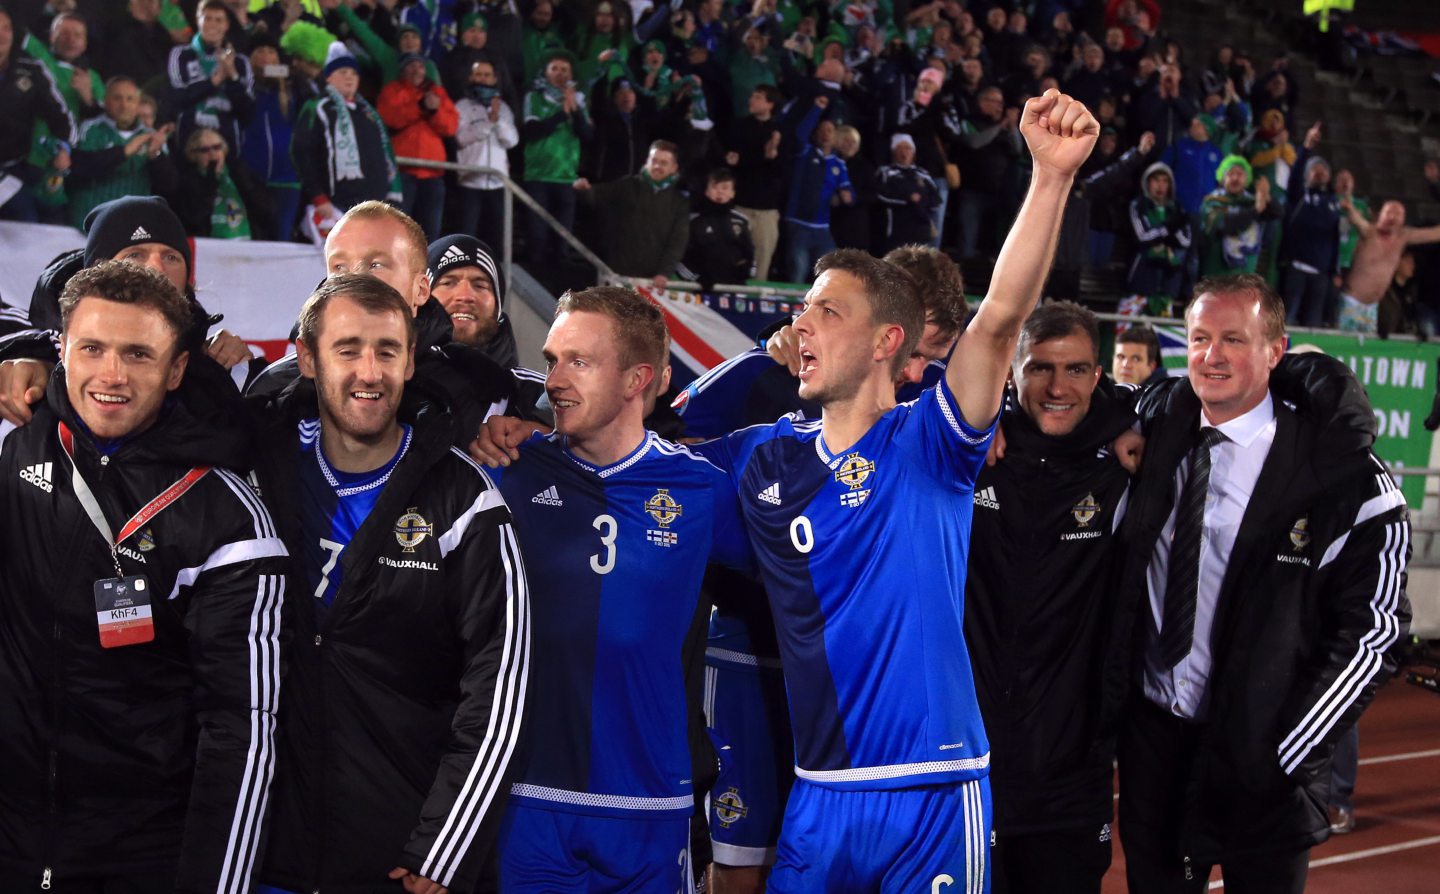 Michael O'Neill celebrates with his Northern Ireland team after a win over Mixu Paatelainen's Finland in Euro qualification. Image: PA